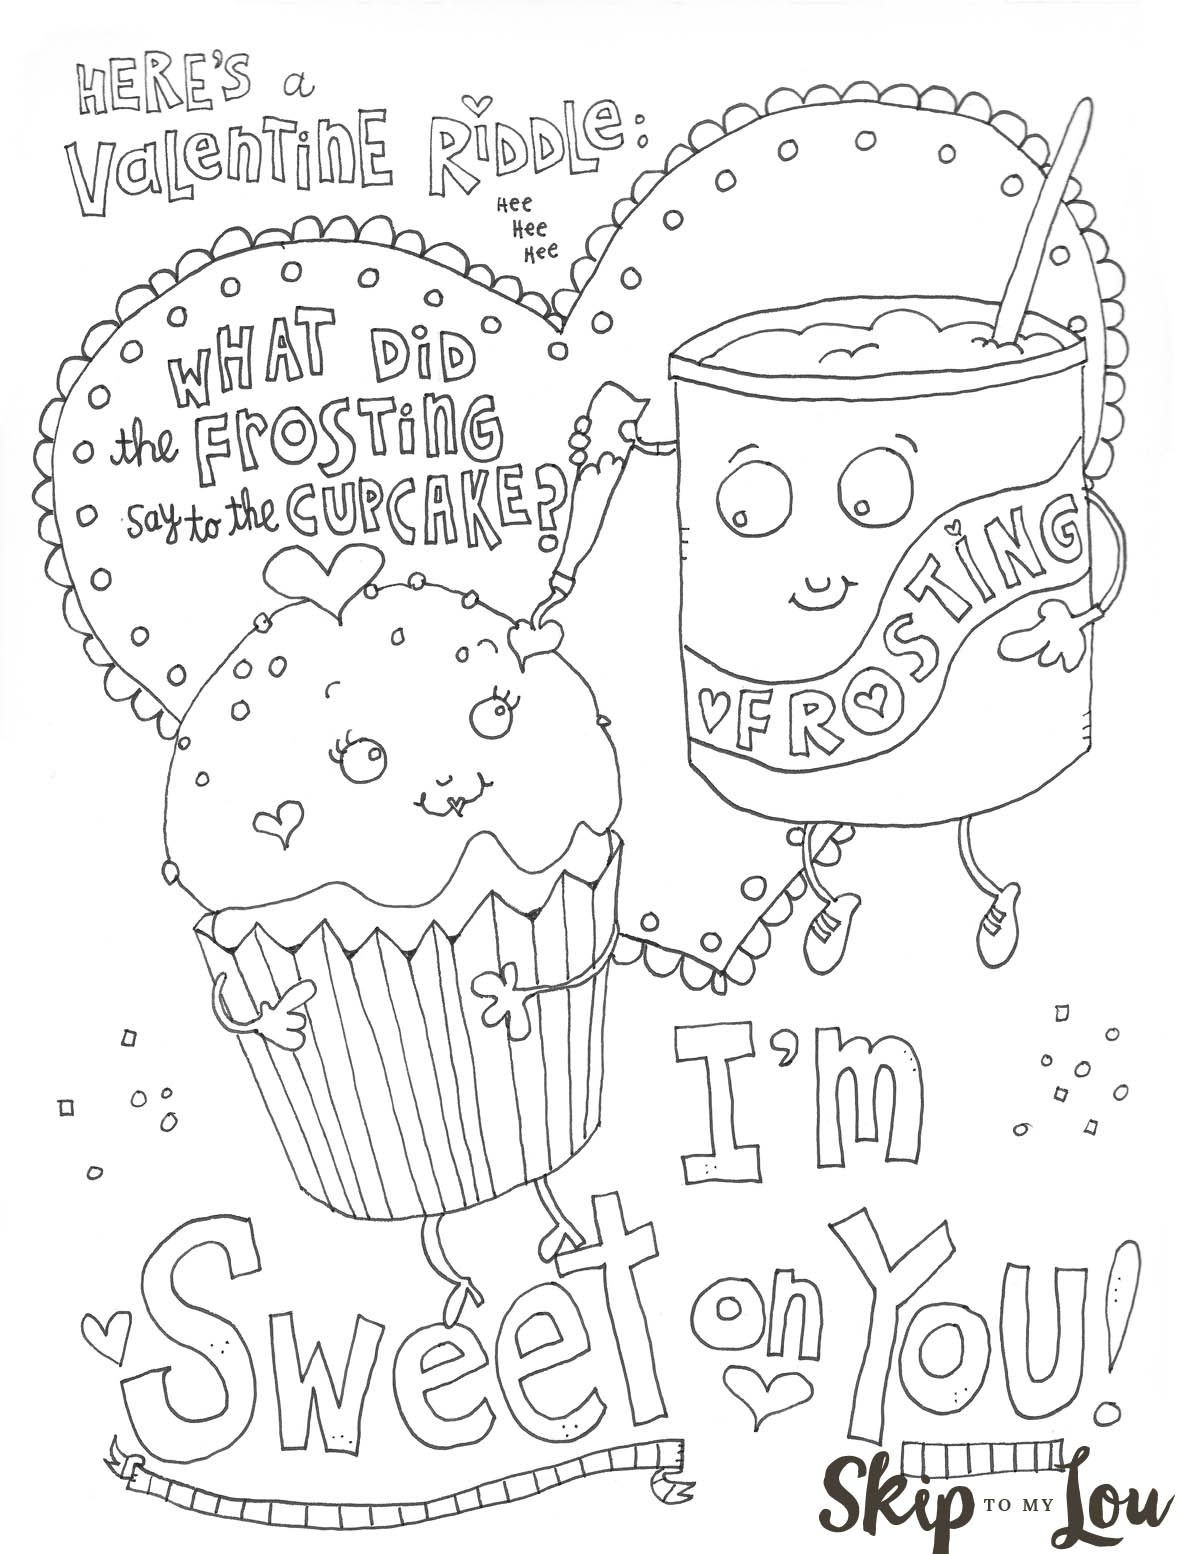 Printable Coloring Pages Valentines Cowboys
 Free Printable Sweet on you Valentine Coloring Sheet An